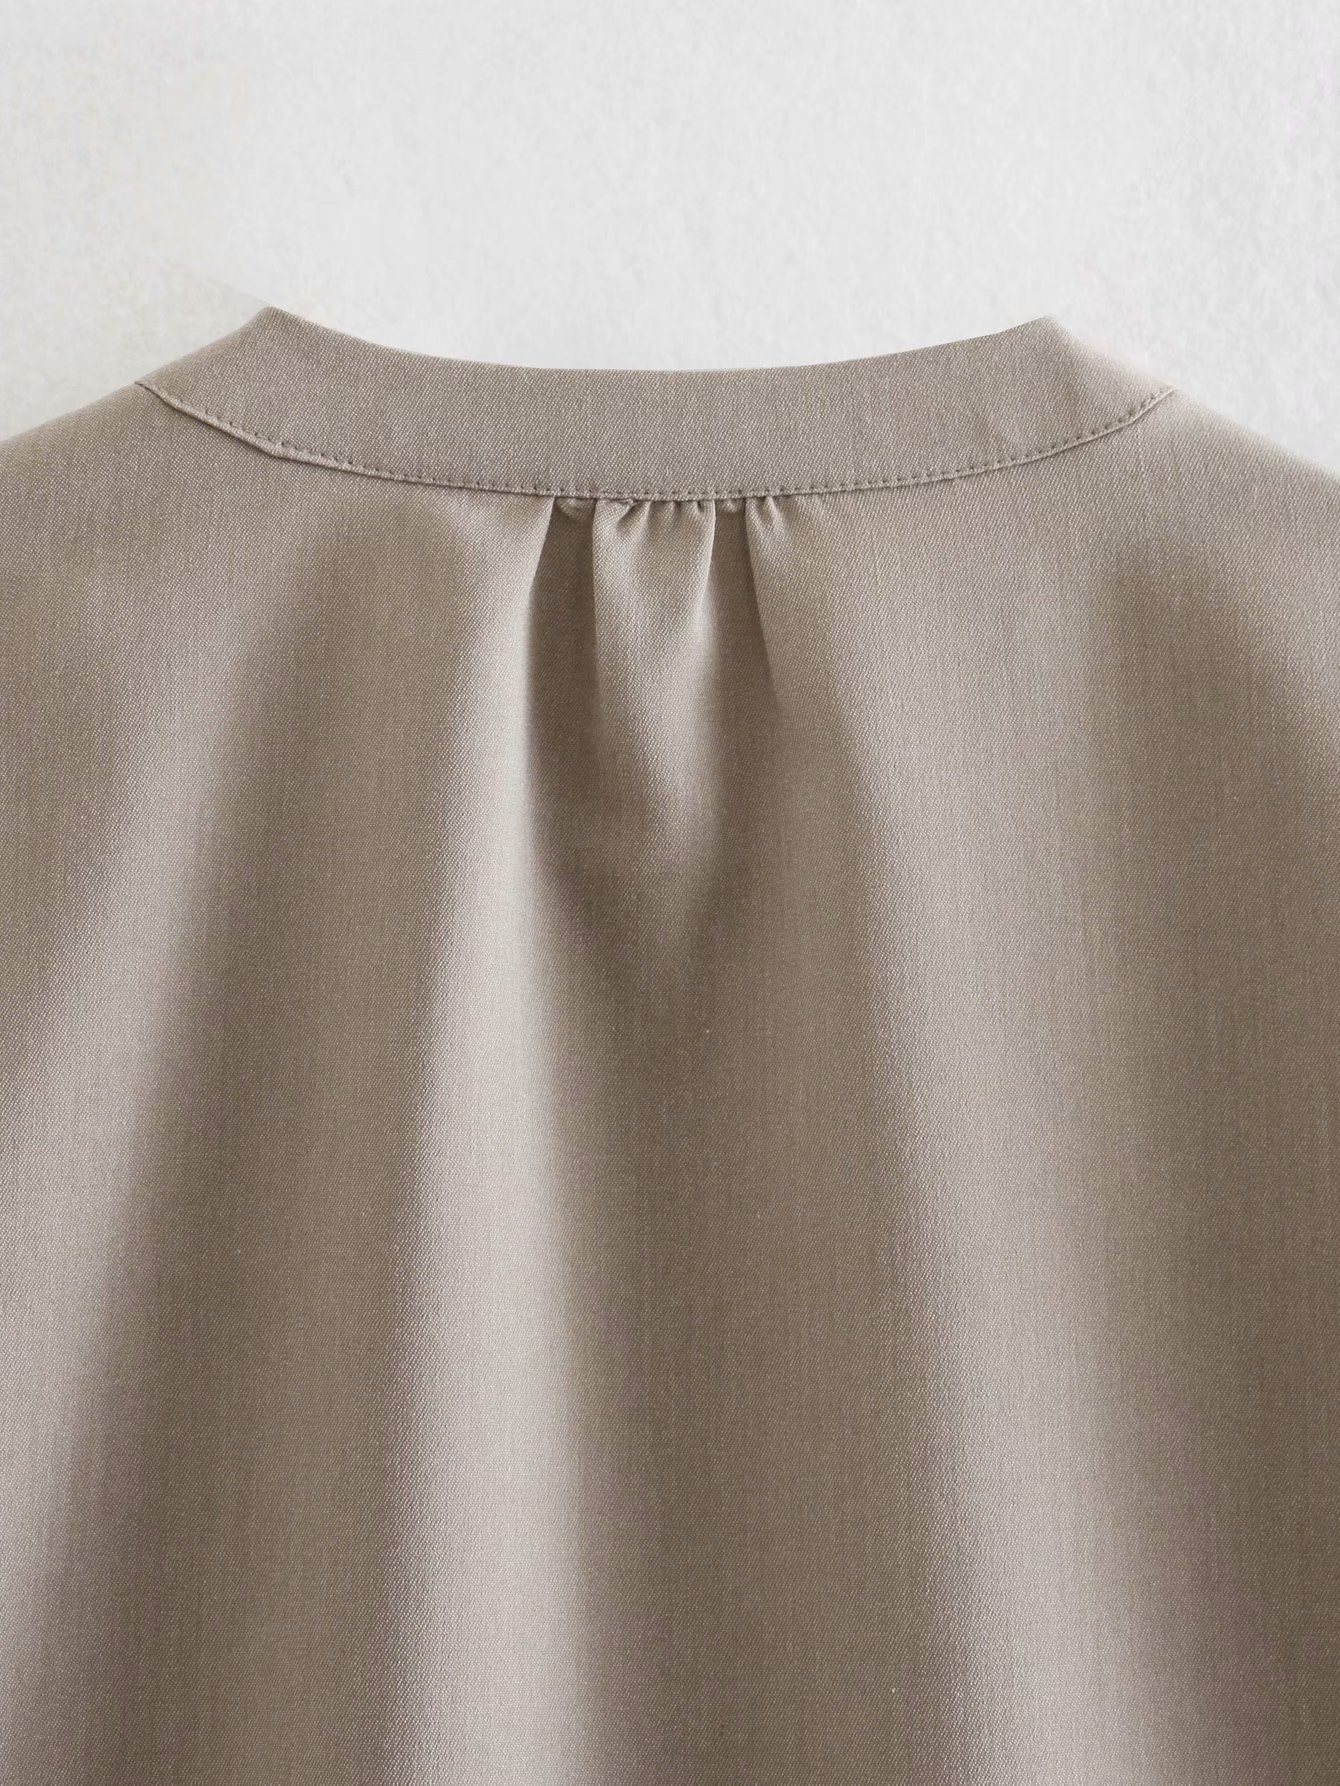 Solid Color Long-Sleeved Round Neck Shirt NSXFL101420